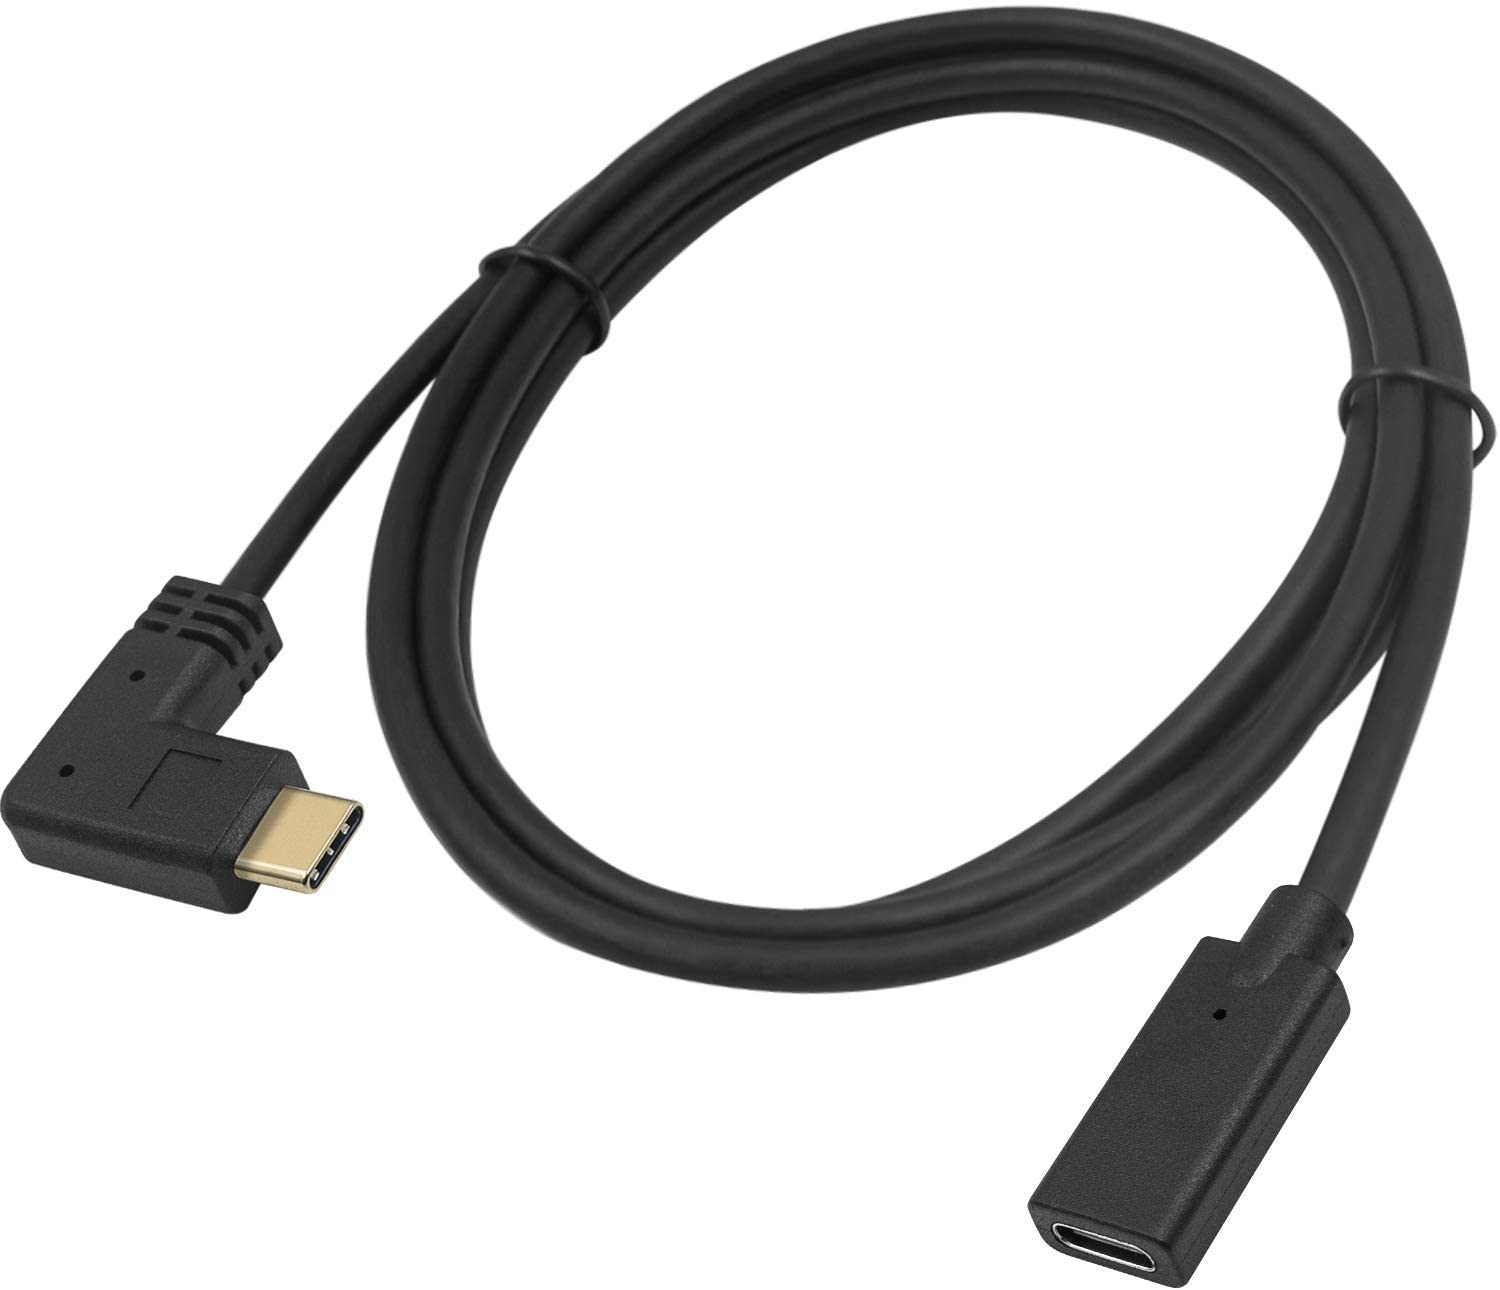 USB 3.1 Type-C Angled Male to Female Fast Charging Extension Cable